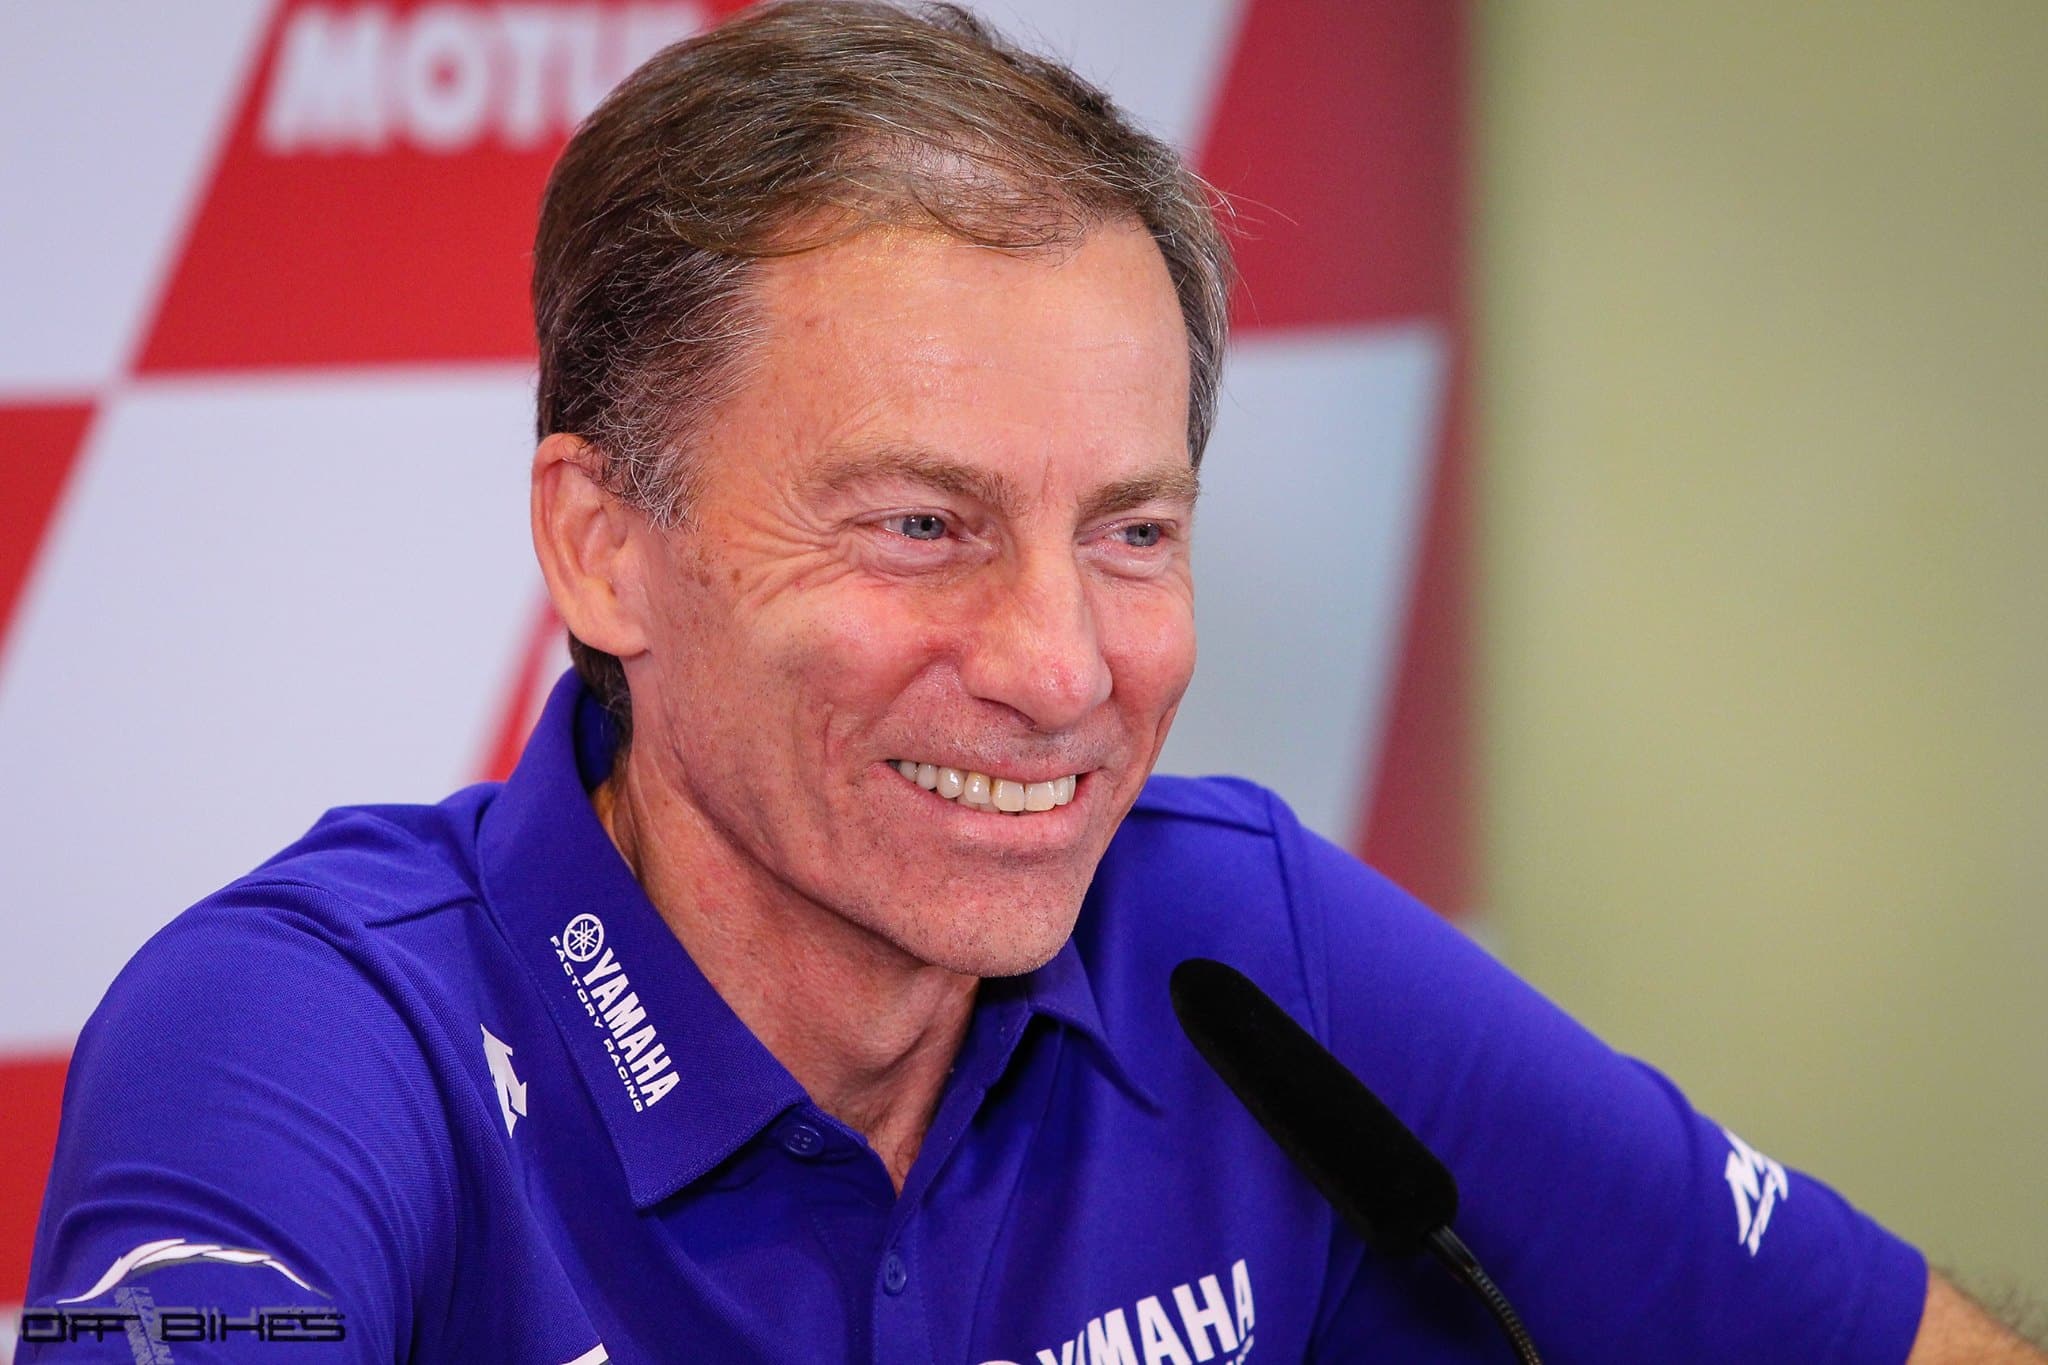 Jerez, Rossi absent at press conference, Lin Jarvis replaces him